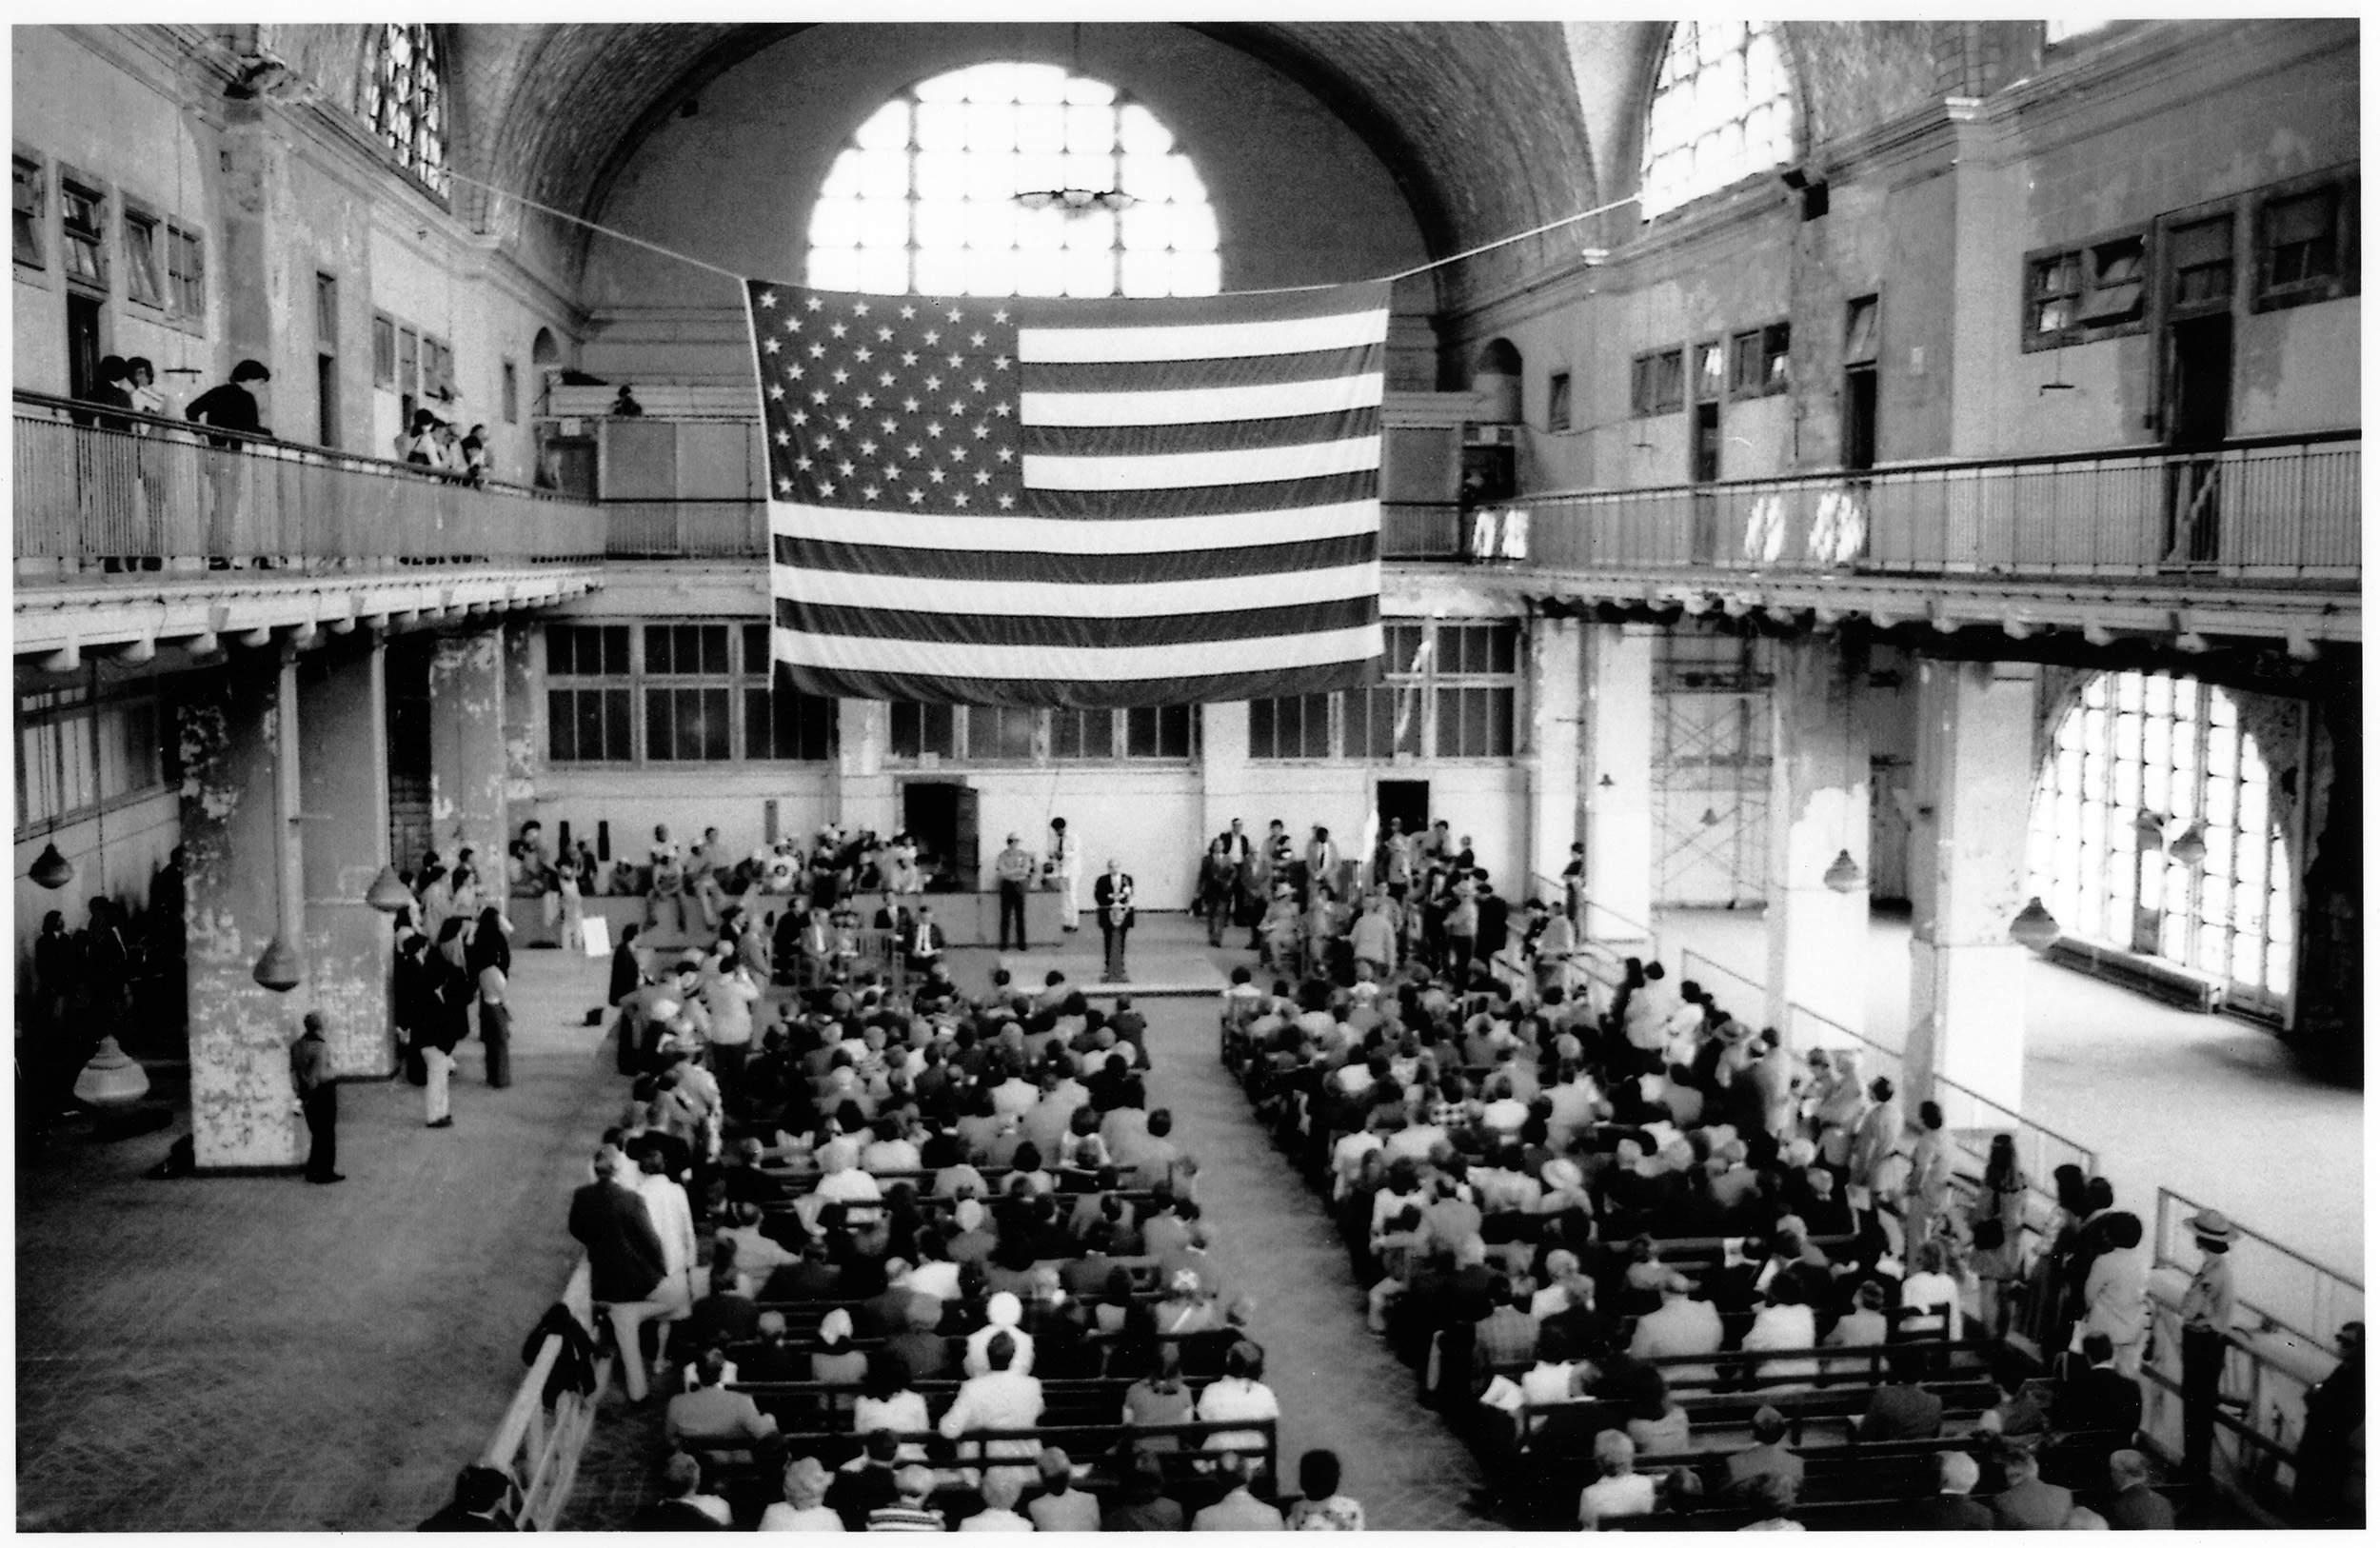 A vintage photo of a grand hall at Ellis Island, with a crowd listening to a speaker.